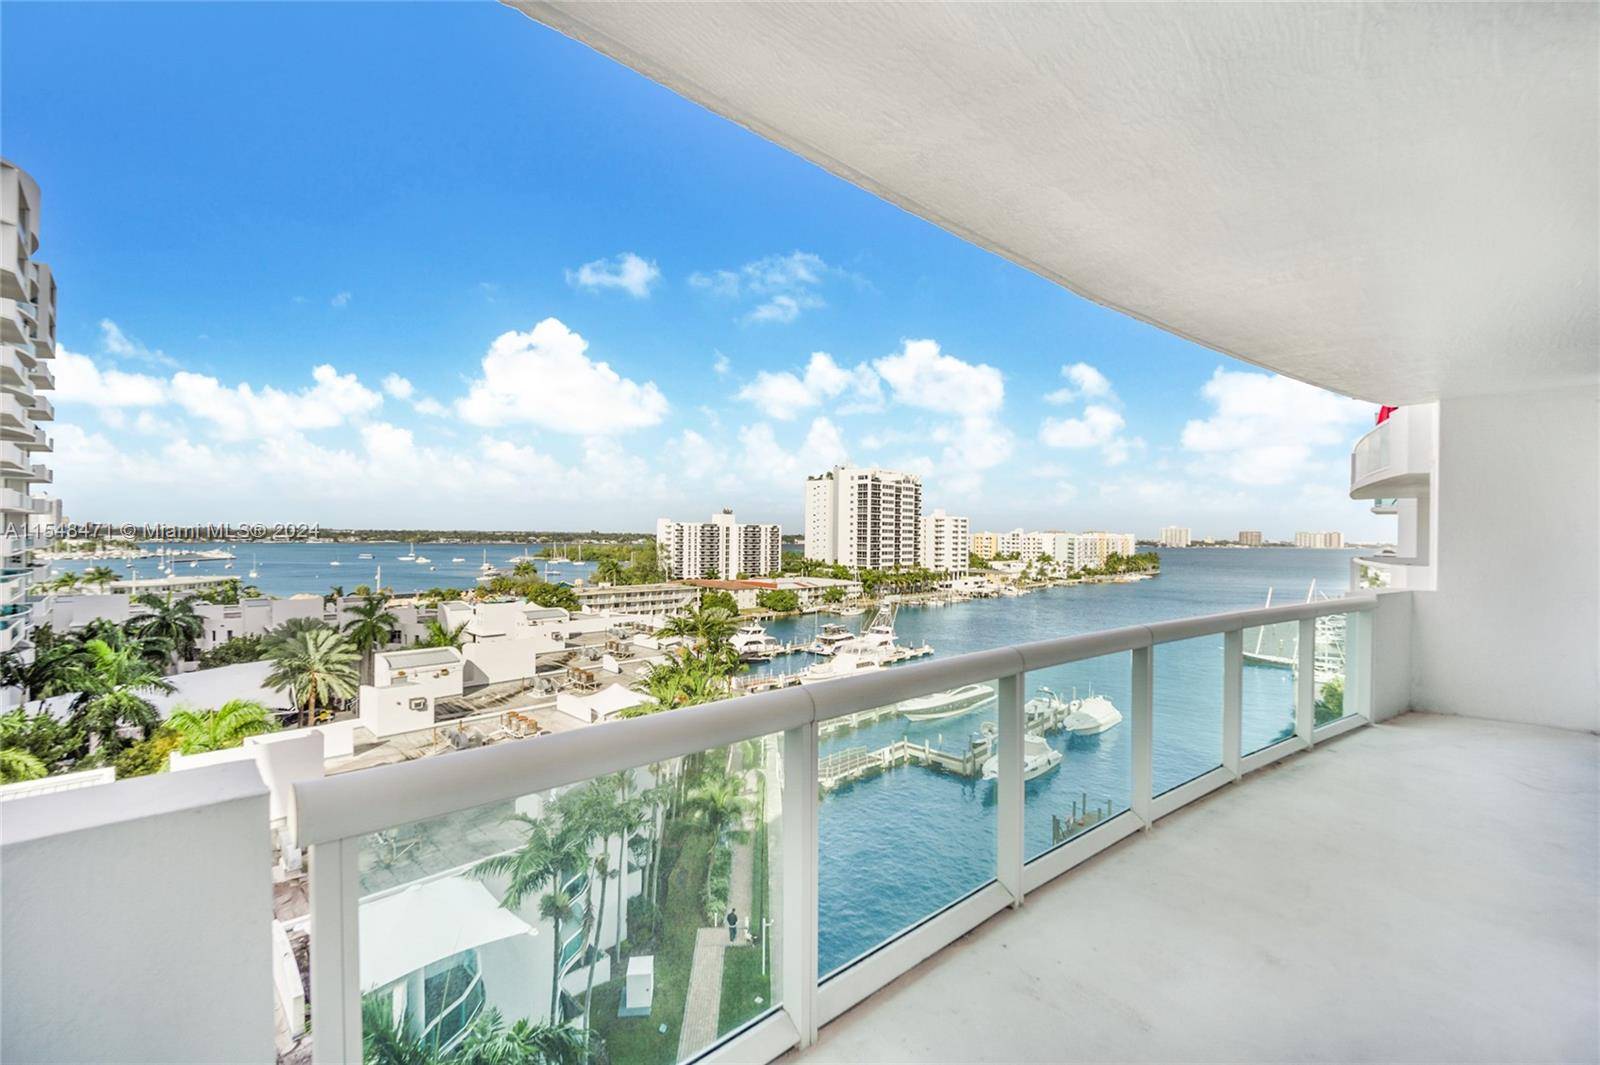 Nestled in the heart of Miami's enchanting Biscayne Bay, discover the epitome of luxury living in this meticulously furnished 2 bedroom residence boasting over 1200 square feet of space.